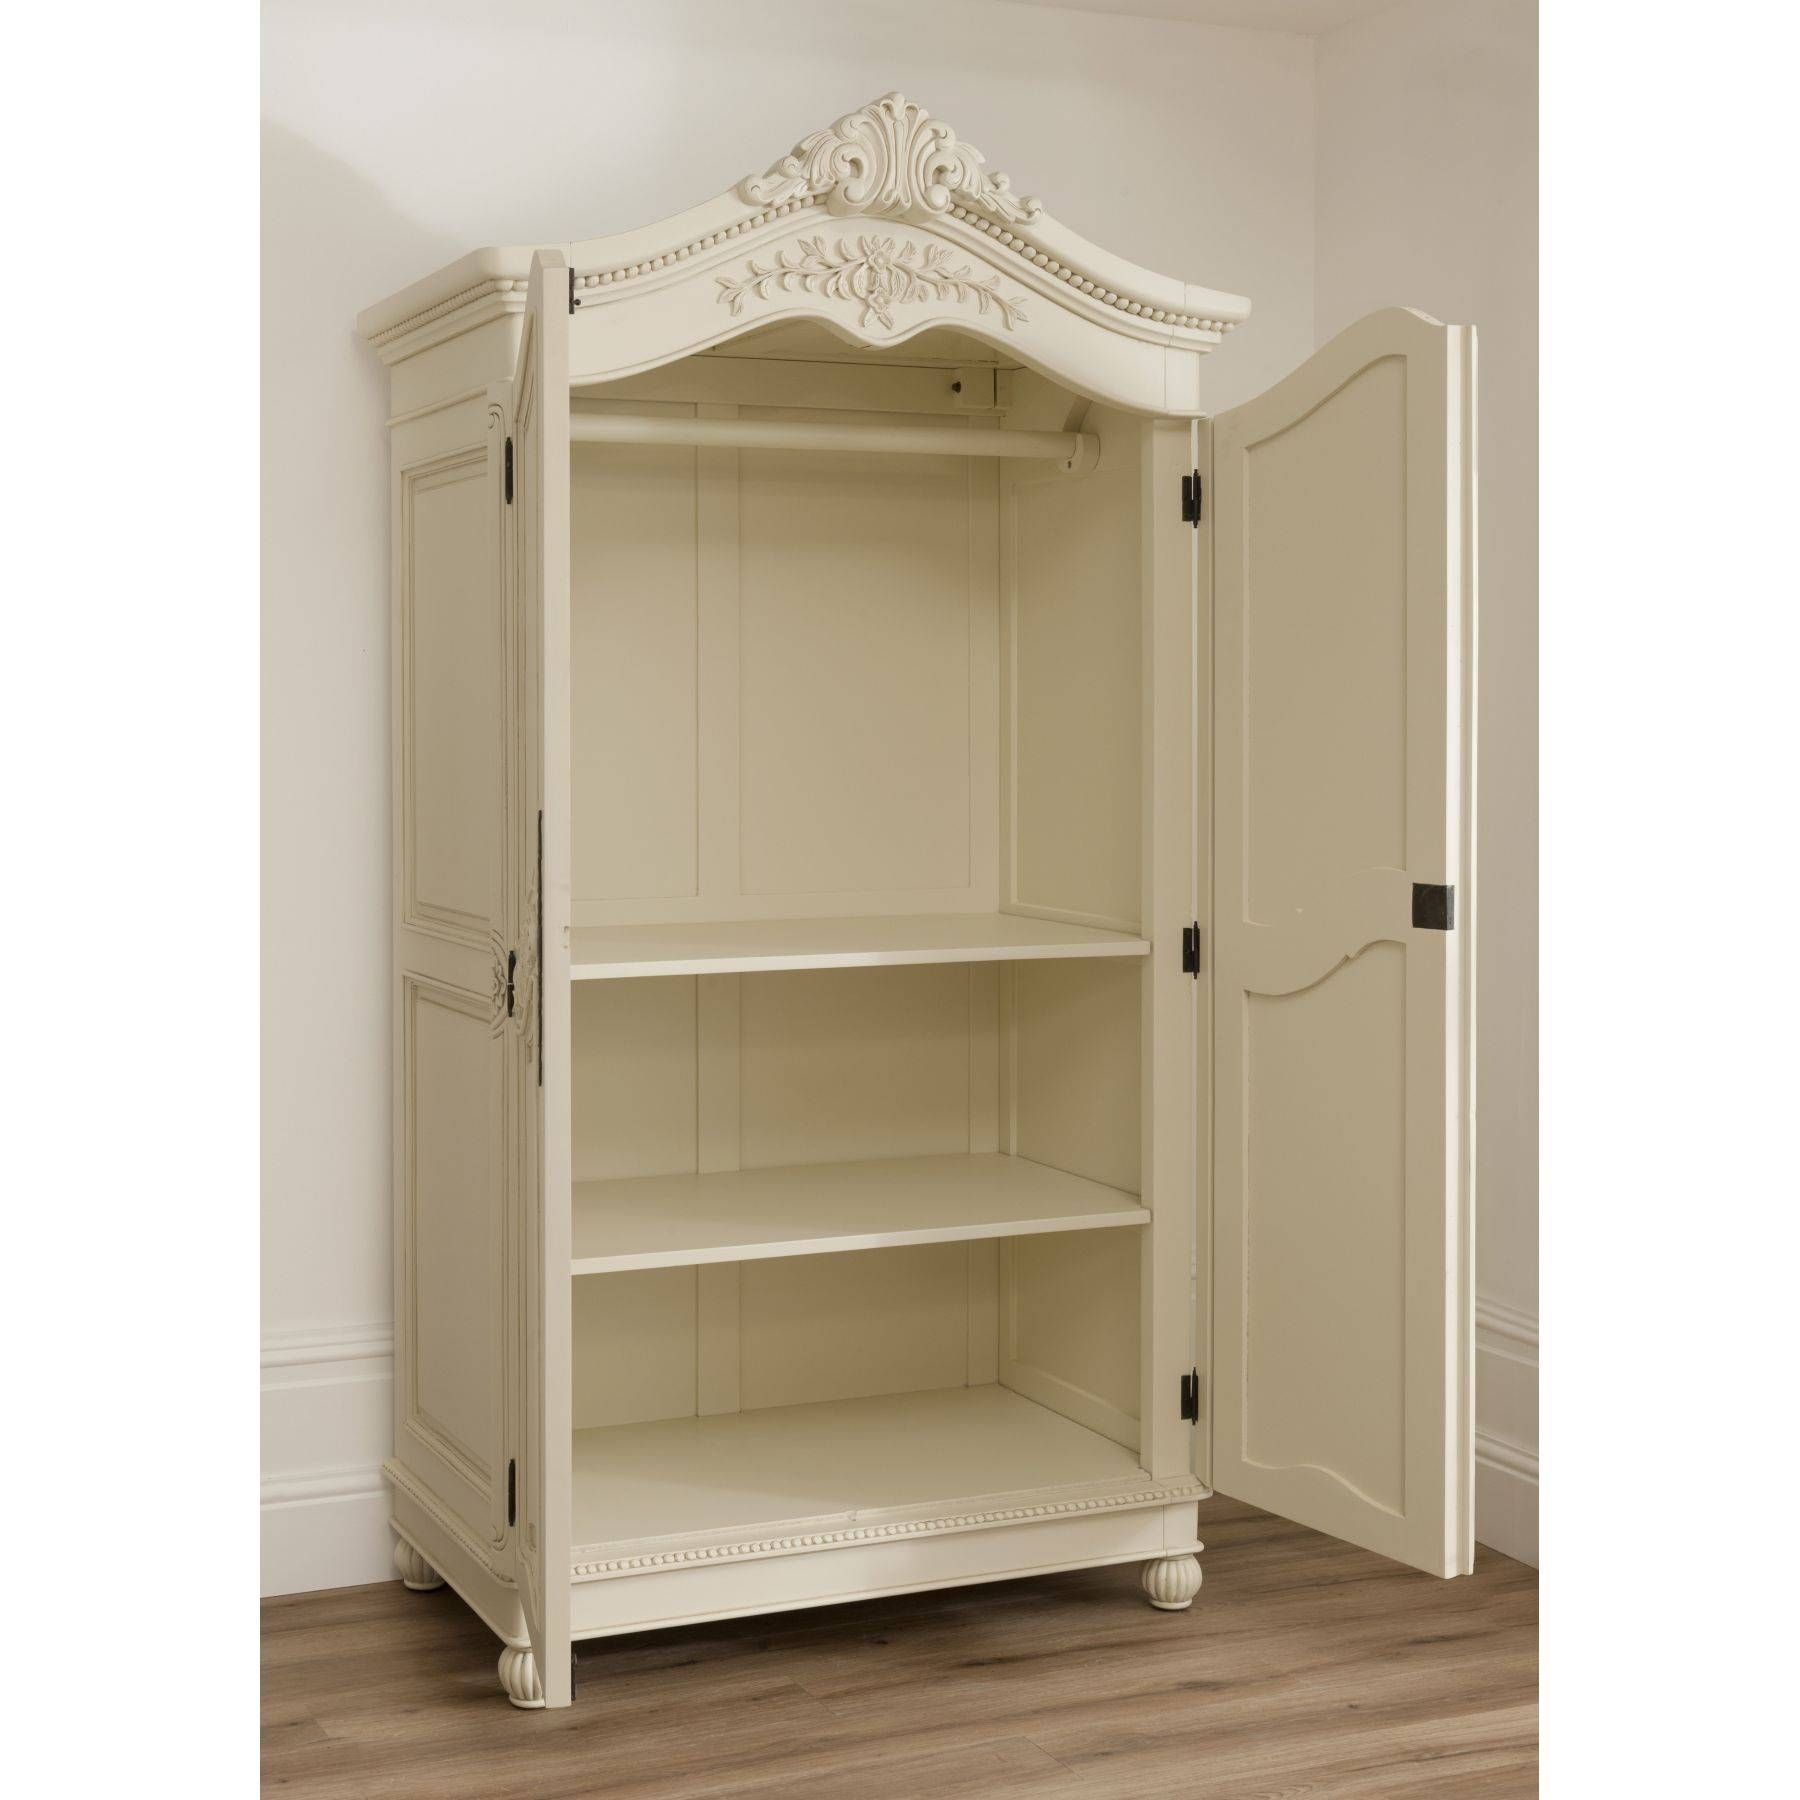 Bordeaux Ivory Shabby Chic Wardrobe | Shabby Chic Furniture For French Shabby Chic Wardrobes (View 15 of 15)